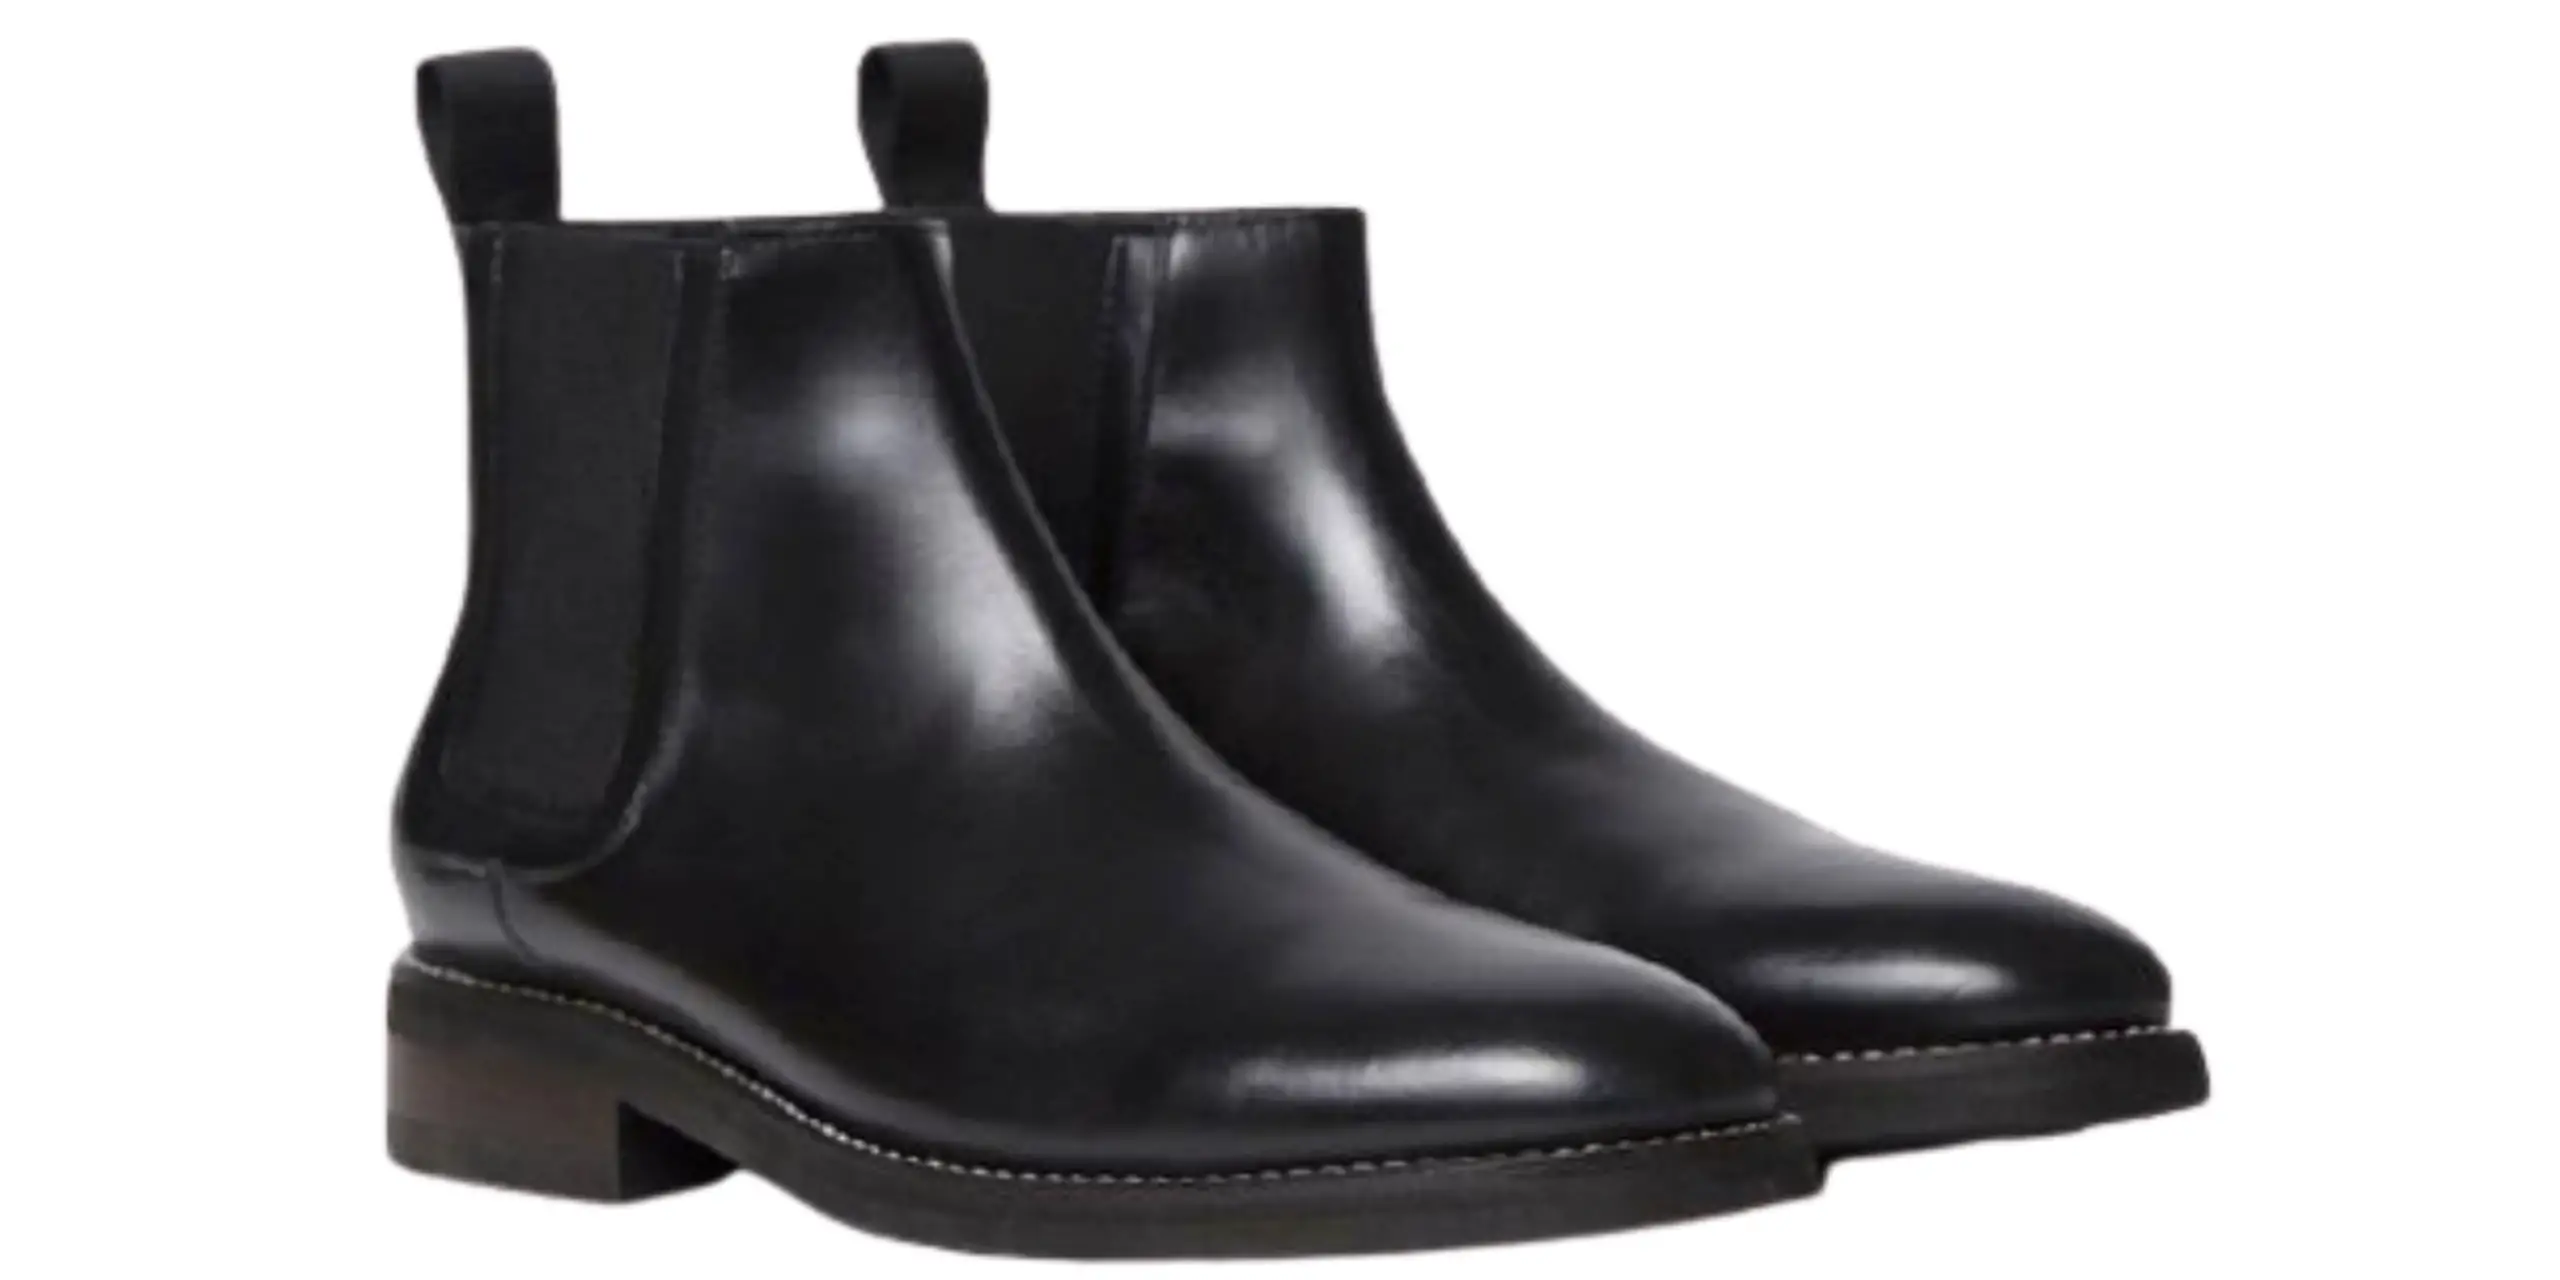 Chelsea Boots - Types of Men's Formal Shoes